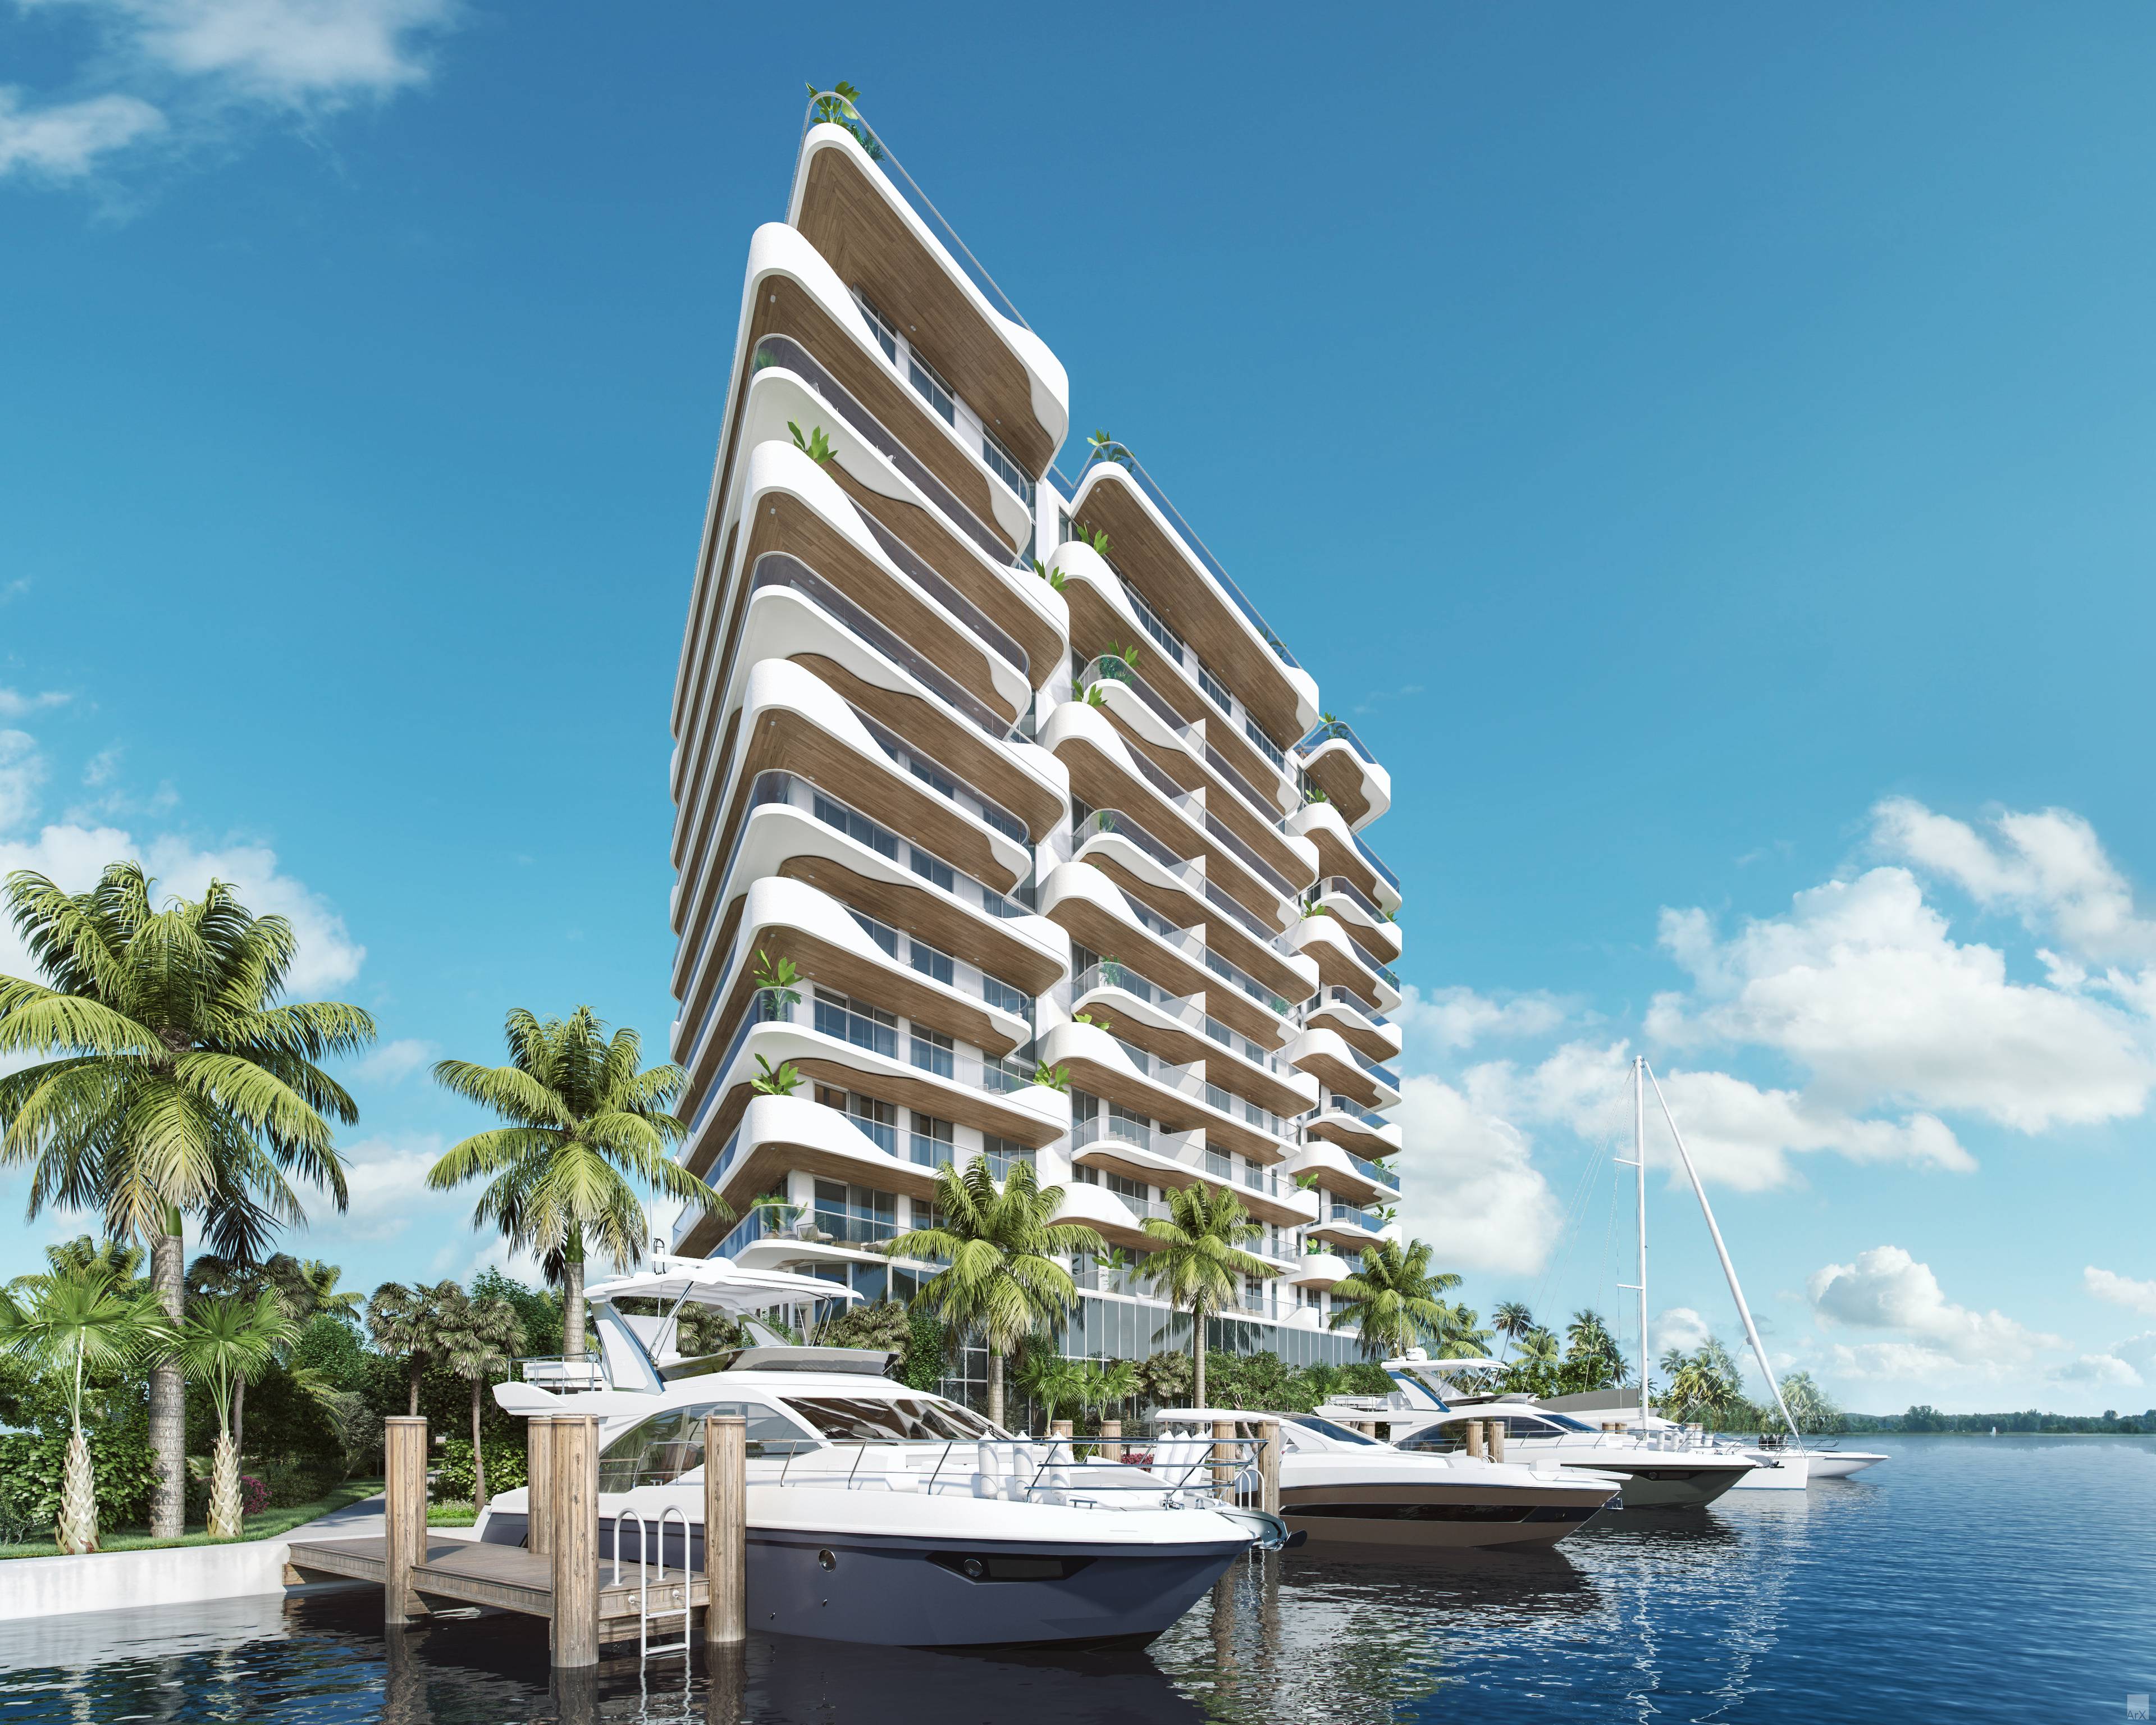 Miami Beach Waterfront Luxury Residences | Private Marina | 2-Bed, 2.5-Bath French Riviera-Inspired Boutique Condo